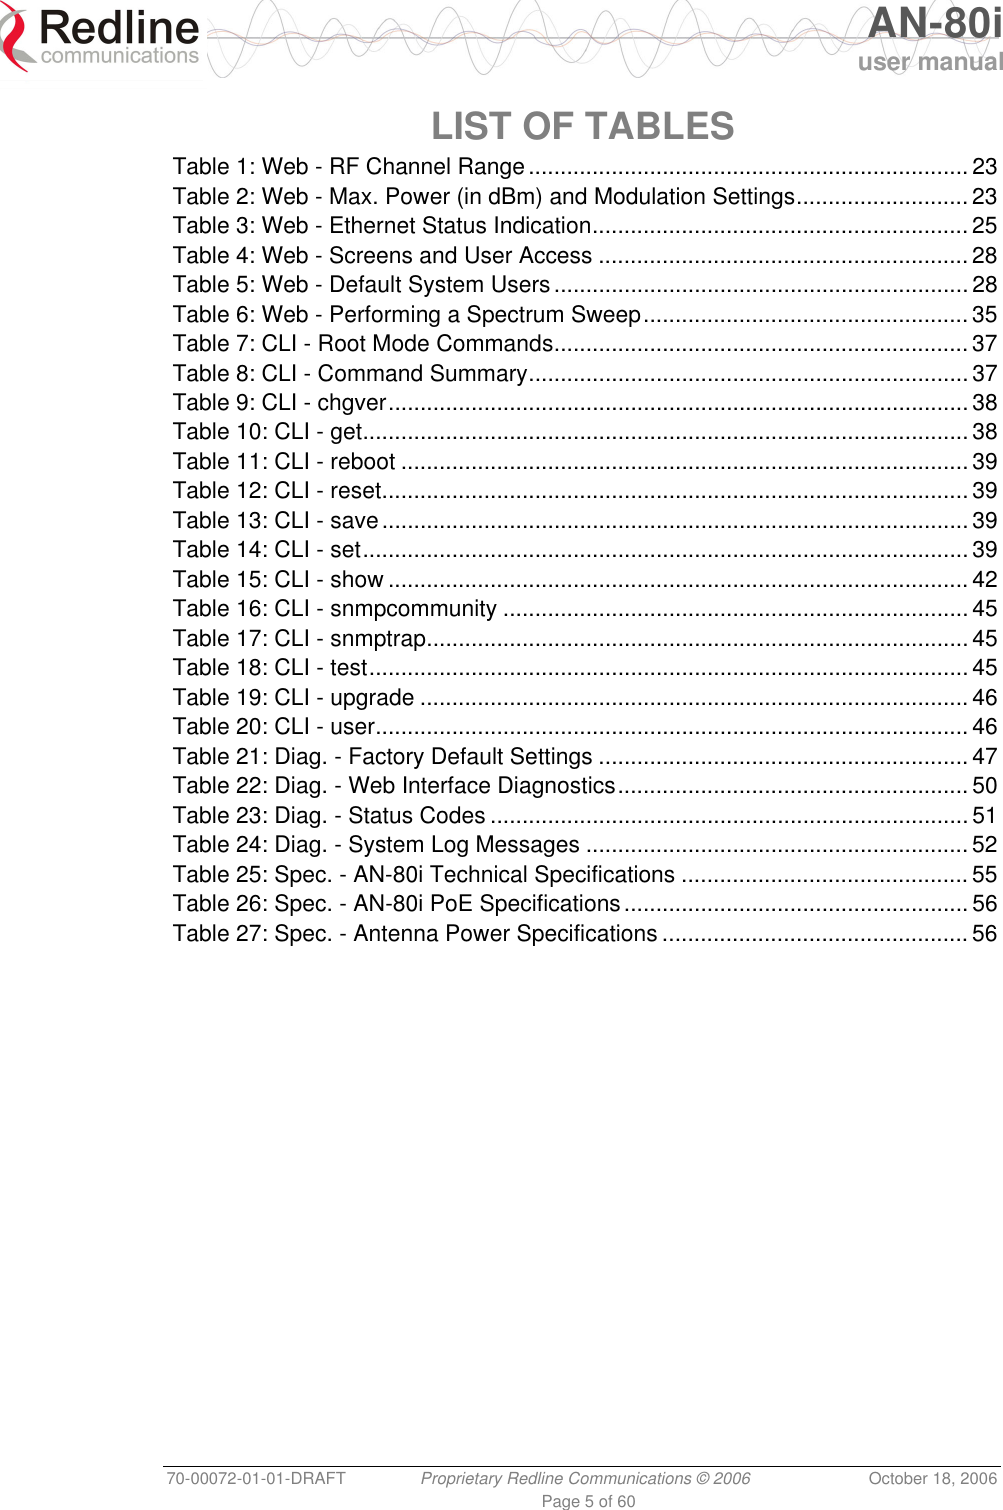   AN-80i user manual 70-00072-01-01-DRAFT  Proprietary Redline Communications © 2006  October 18, 2006 Page 5 of 60 LIST OF TABLES Table 1: Web - RF Channel Range..................................................................... 23 Table 2: Web - Max. Power (in dBm) and Modulation Settings........................... 23 Table 3: Web - Ethernet Status Indication........................................................... 25 Table 4: Web - Screens and User Access ..........................................................28 Table 5: Web - Default System Users................................................................. 28 Table 6: Web - Performing a Spectrum Sweep................................................... 35 Table 7: CLI - Root Mode Commands................................................................. 37 Table 8: CLI - Command Summary..................................................................... 37 Table 9: CLI - chgver........................................................................................... 38 Table 10: CLI - get............................................................................................... 38 Table 11: CLI - reboot .........................................................................................39 Table 12: CLI - reset............................................................................................ 39 Table 13: CLI - save............................................................................................39 Table 14: CLI - set............................................................................................... 39 Table 15: CLI - show ........................................................................................... 42 Table 16: CLI - snmpcommunity ......................................................................... 45 Table 17: CLI - snmptrap..................................................................................... 45 Table 18: CLI - test.............................................................................................. 45 Table 19: CLI - upgrade ......................................................................................46 Table 20: CLI - user............................................................................................. 46 Table 21: Diag. - Factory Default Settings .......................................................... 47 Table 22: Diag. - Web Interface Diagnostics....................................................... 50 Table 23: Diag. - Status Codes ........................................................................... 51 Table 24: Diag. - System Log Messages ............................................................ 52 Table 25: Spec. - AN-80i Technical Specifications ............................................. 55 Table 26: Spec. - AN-80i PoE Specifications......................................................56 Table 27: Spec. - Antenna Power Specifications ................................................ 56 